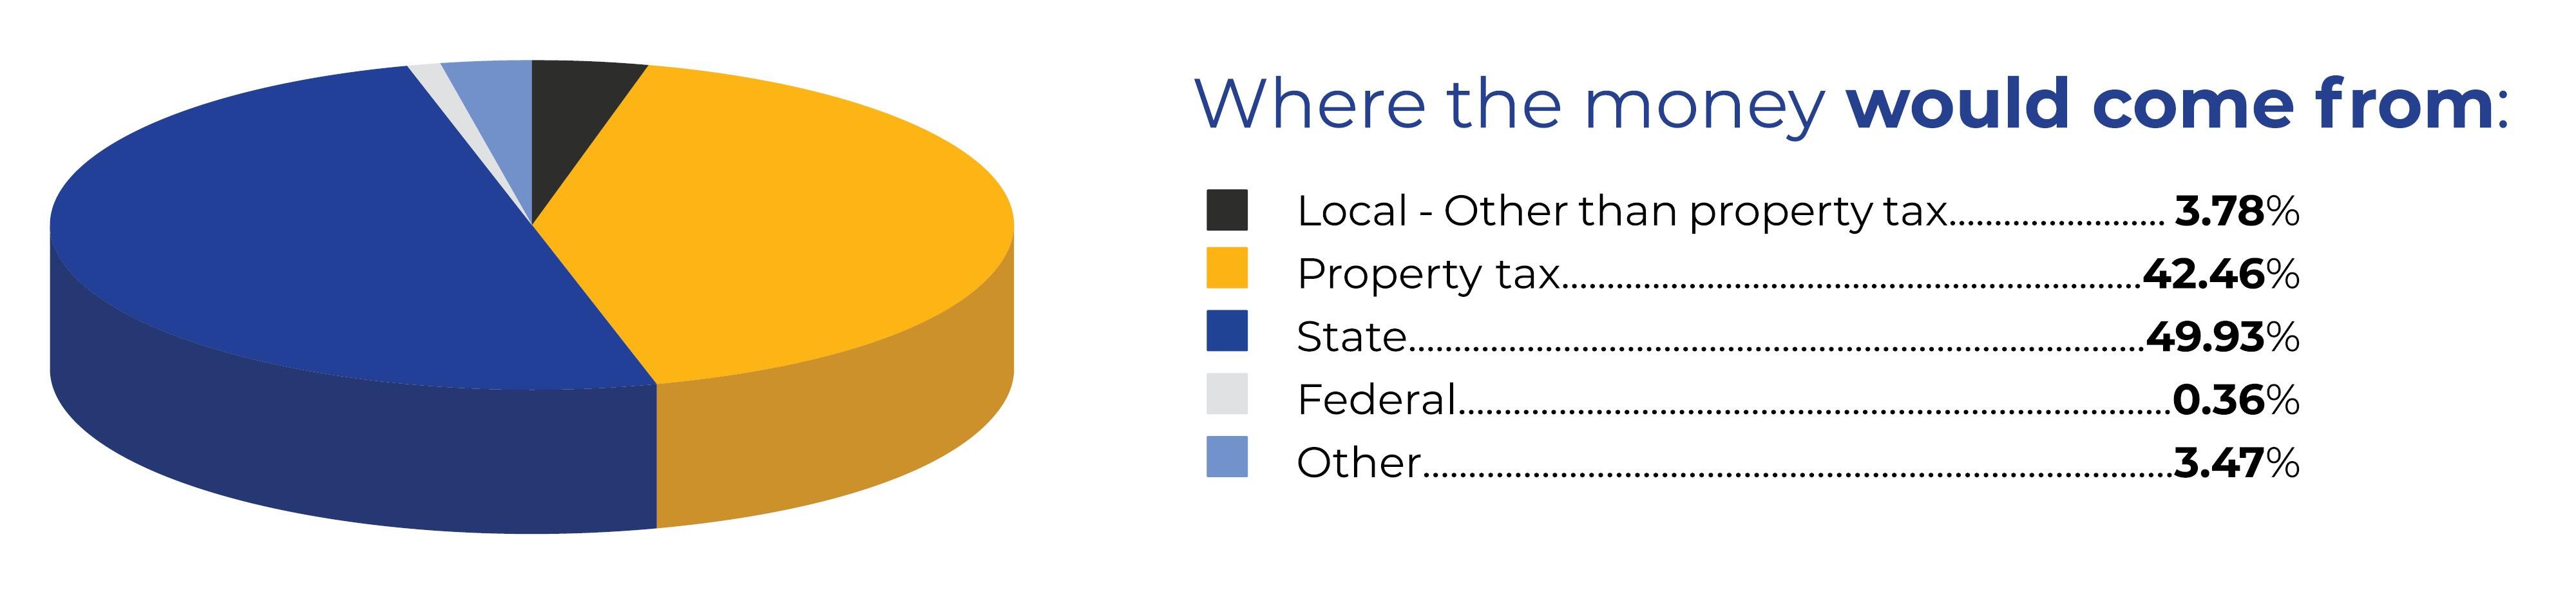 Pie chart with the following breakdown of revenue: Local - Other than property tax 3.78%; Property tax 42.46%; State 49.93%; Federal 0.36%; Other 3.47%